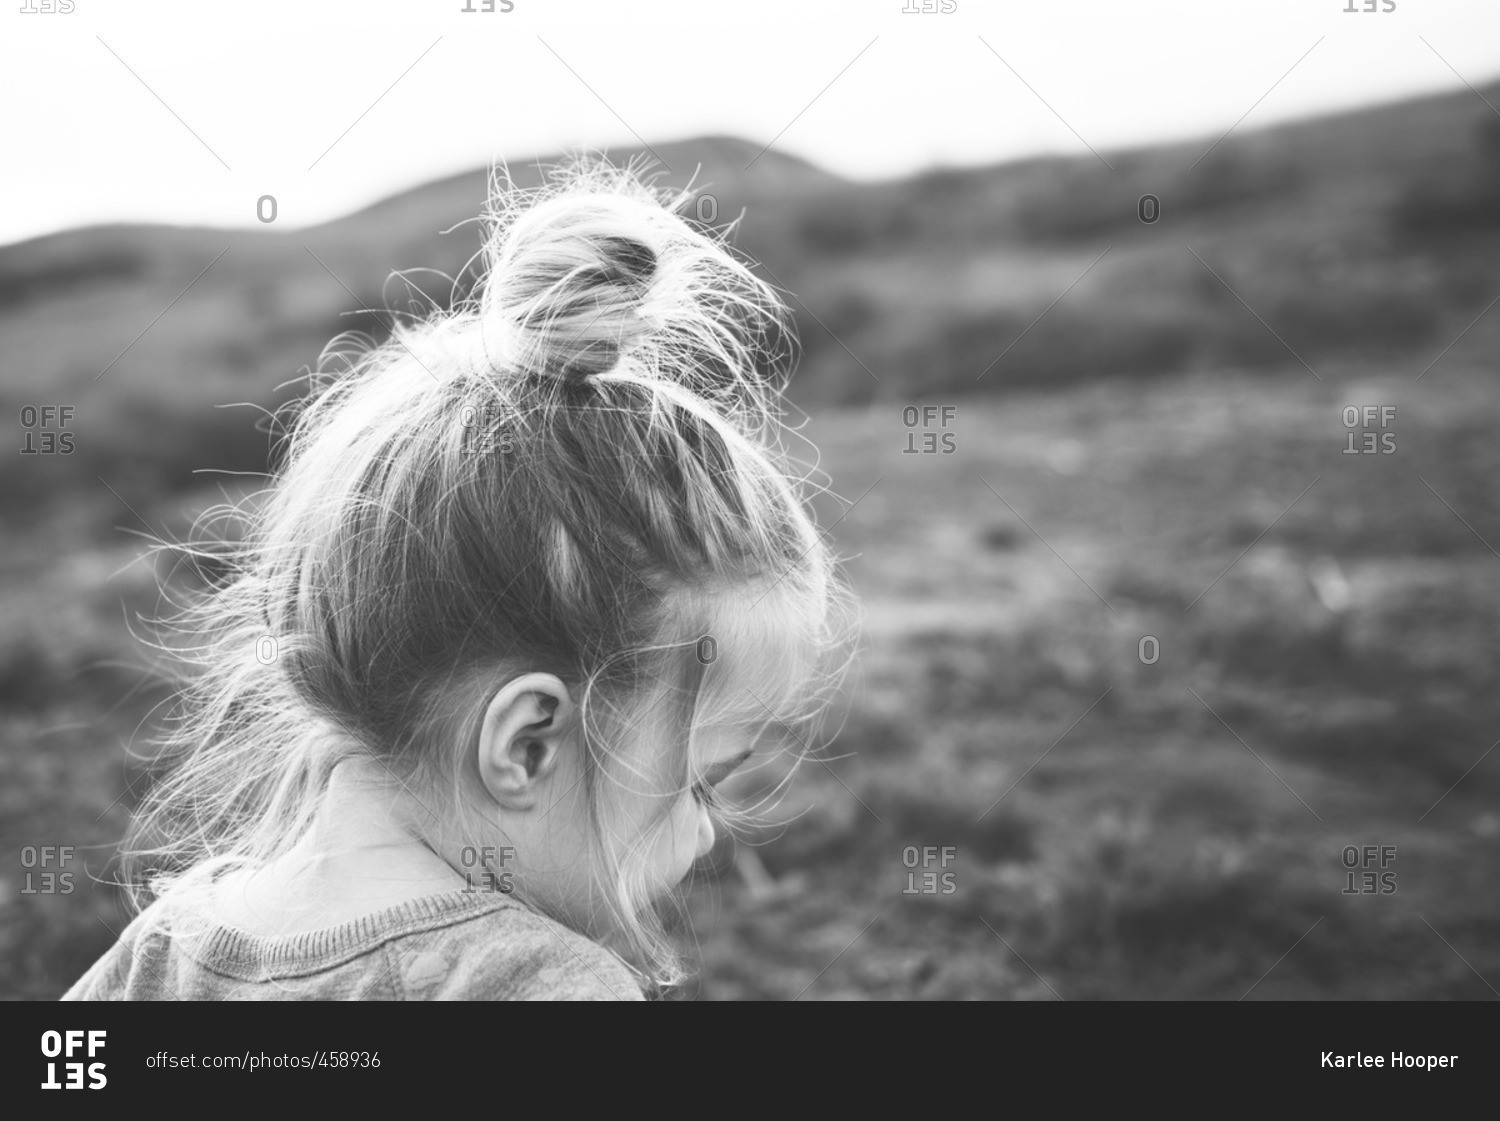 Little girl with a messy bun in black and white